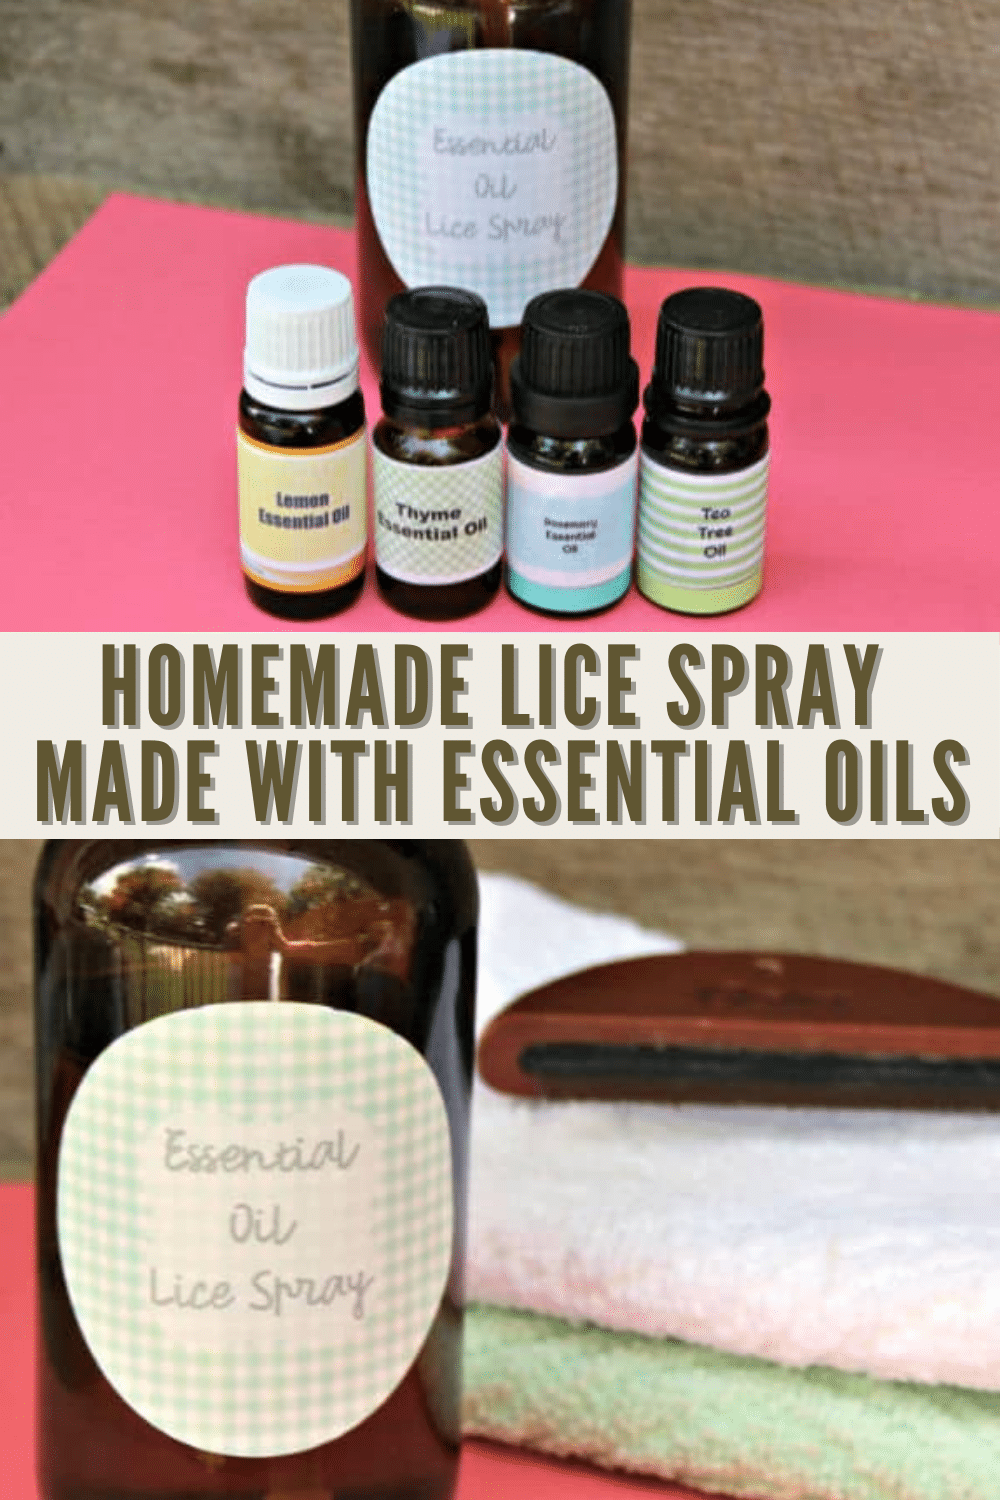 Homemade lice spray is easy to make and contains essential oils that may help prevent a head lice infestation. This is easy to use as a lice shampoo. #lice #essentialoilrecipes #homemadelicespray via @wondermomwannab